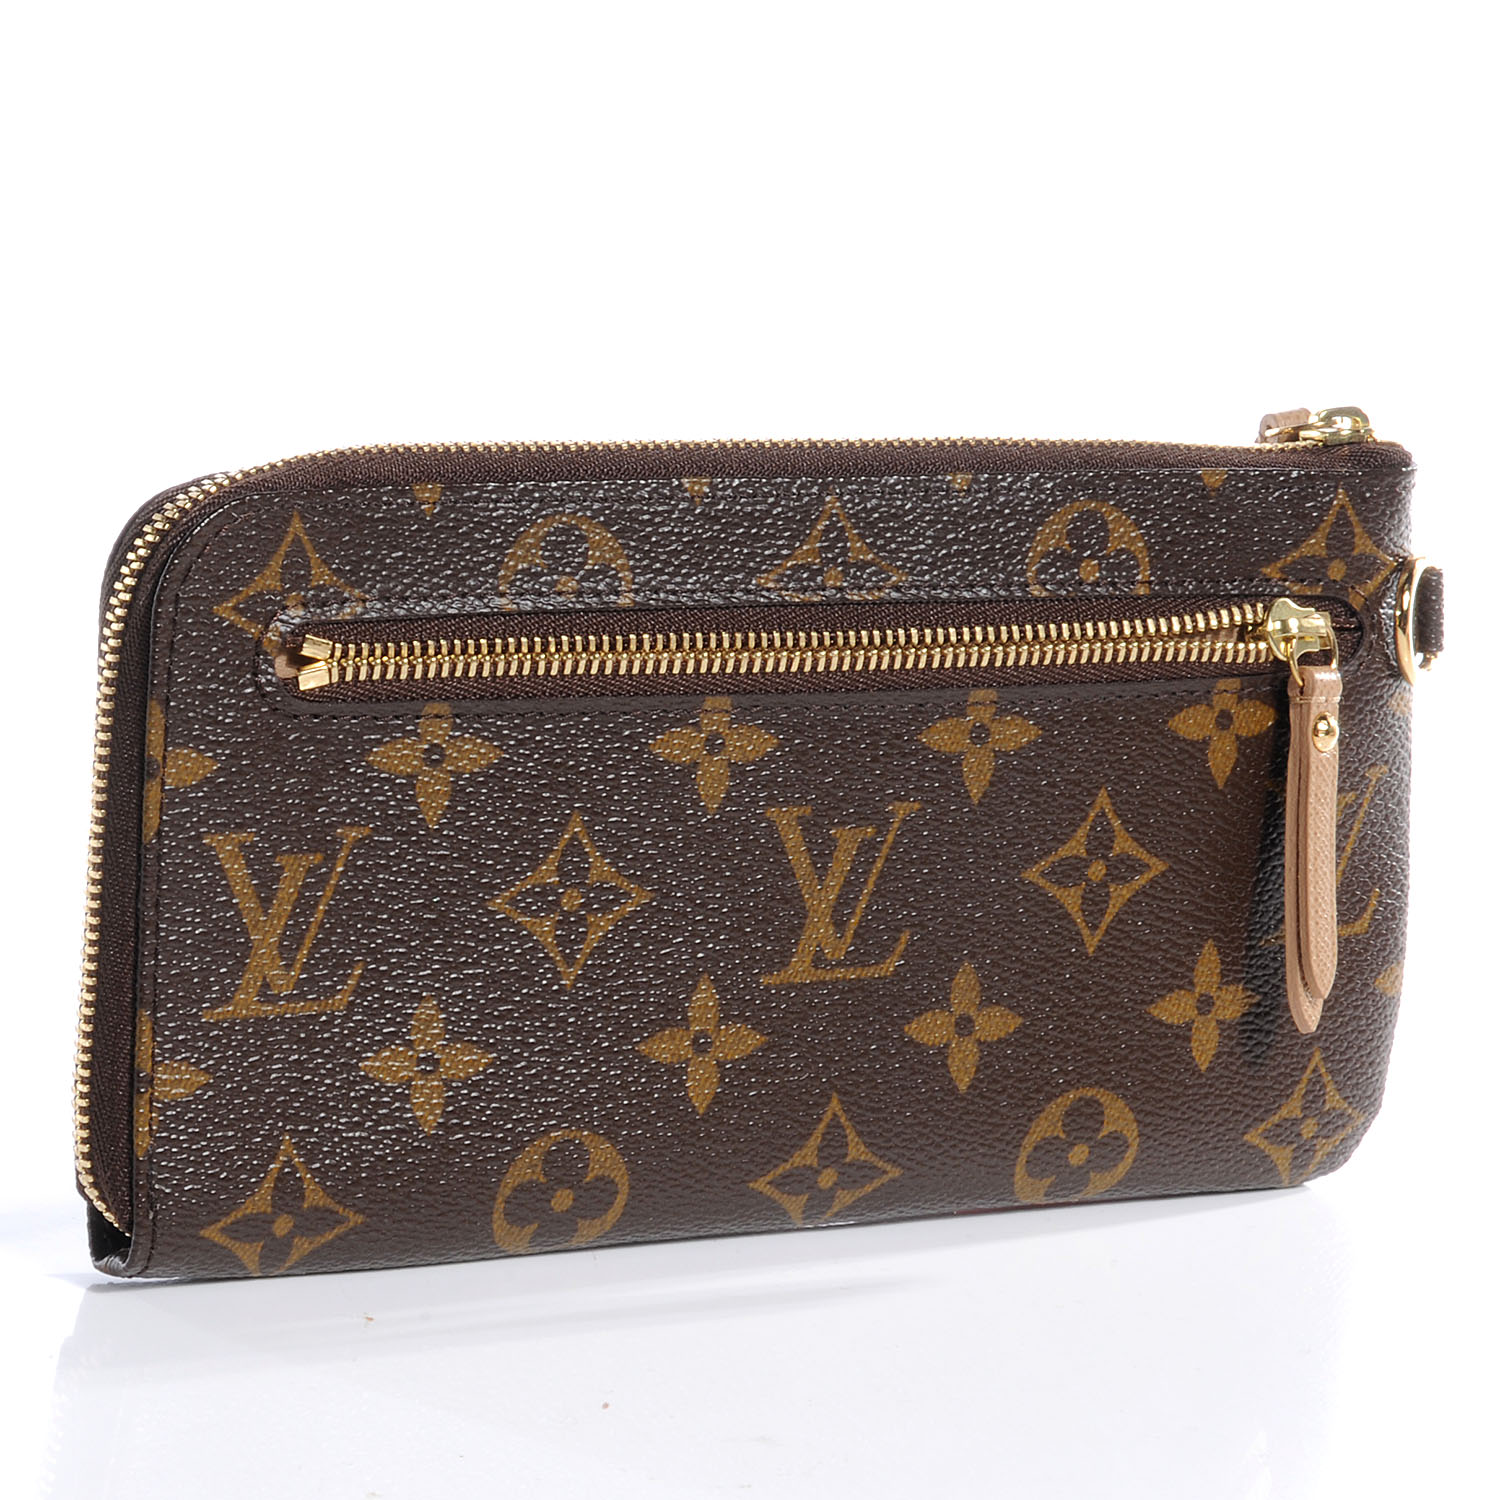 LOUIS VUITTON Complice Trunks and Bags Wallet Beige 59671